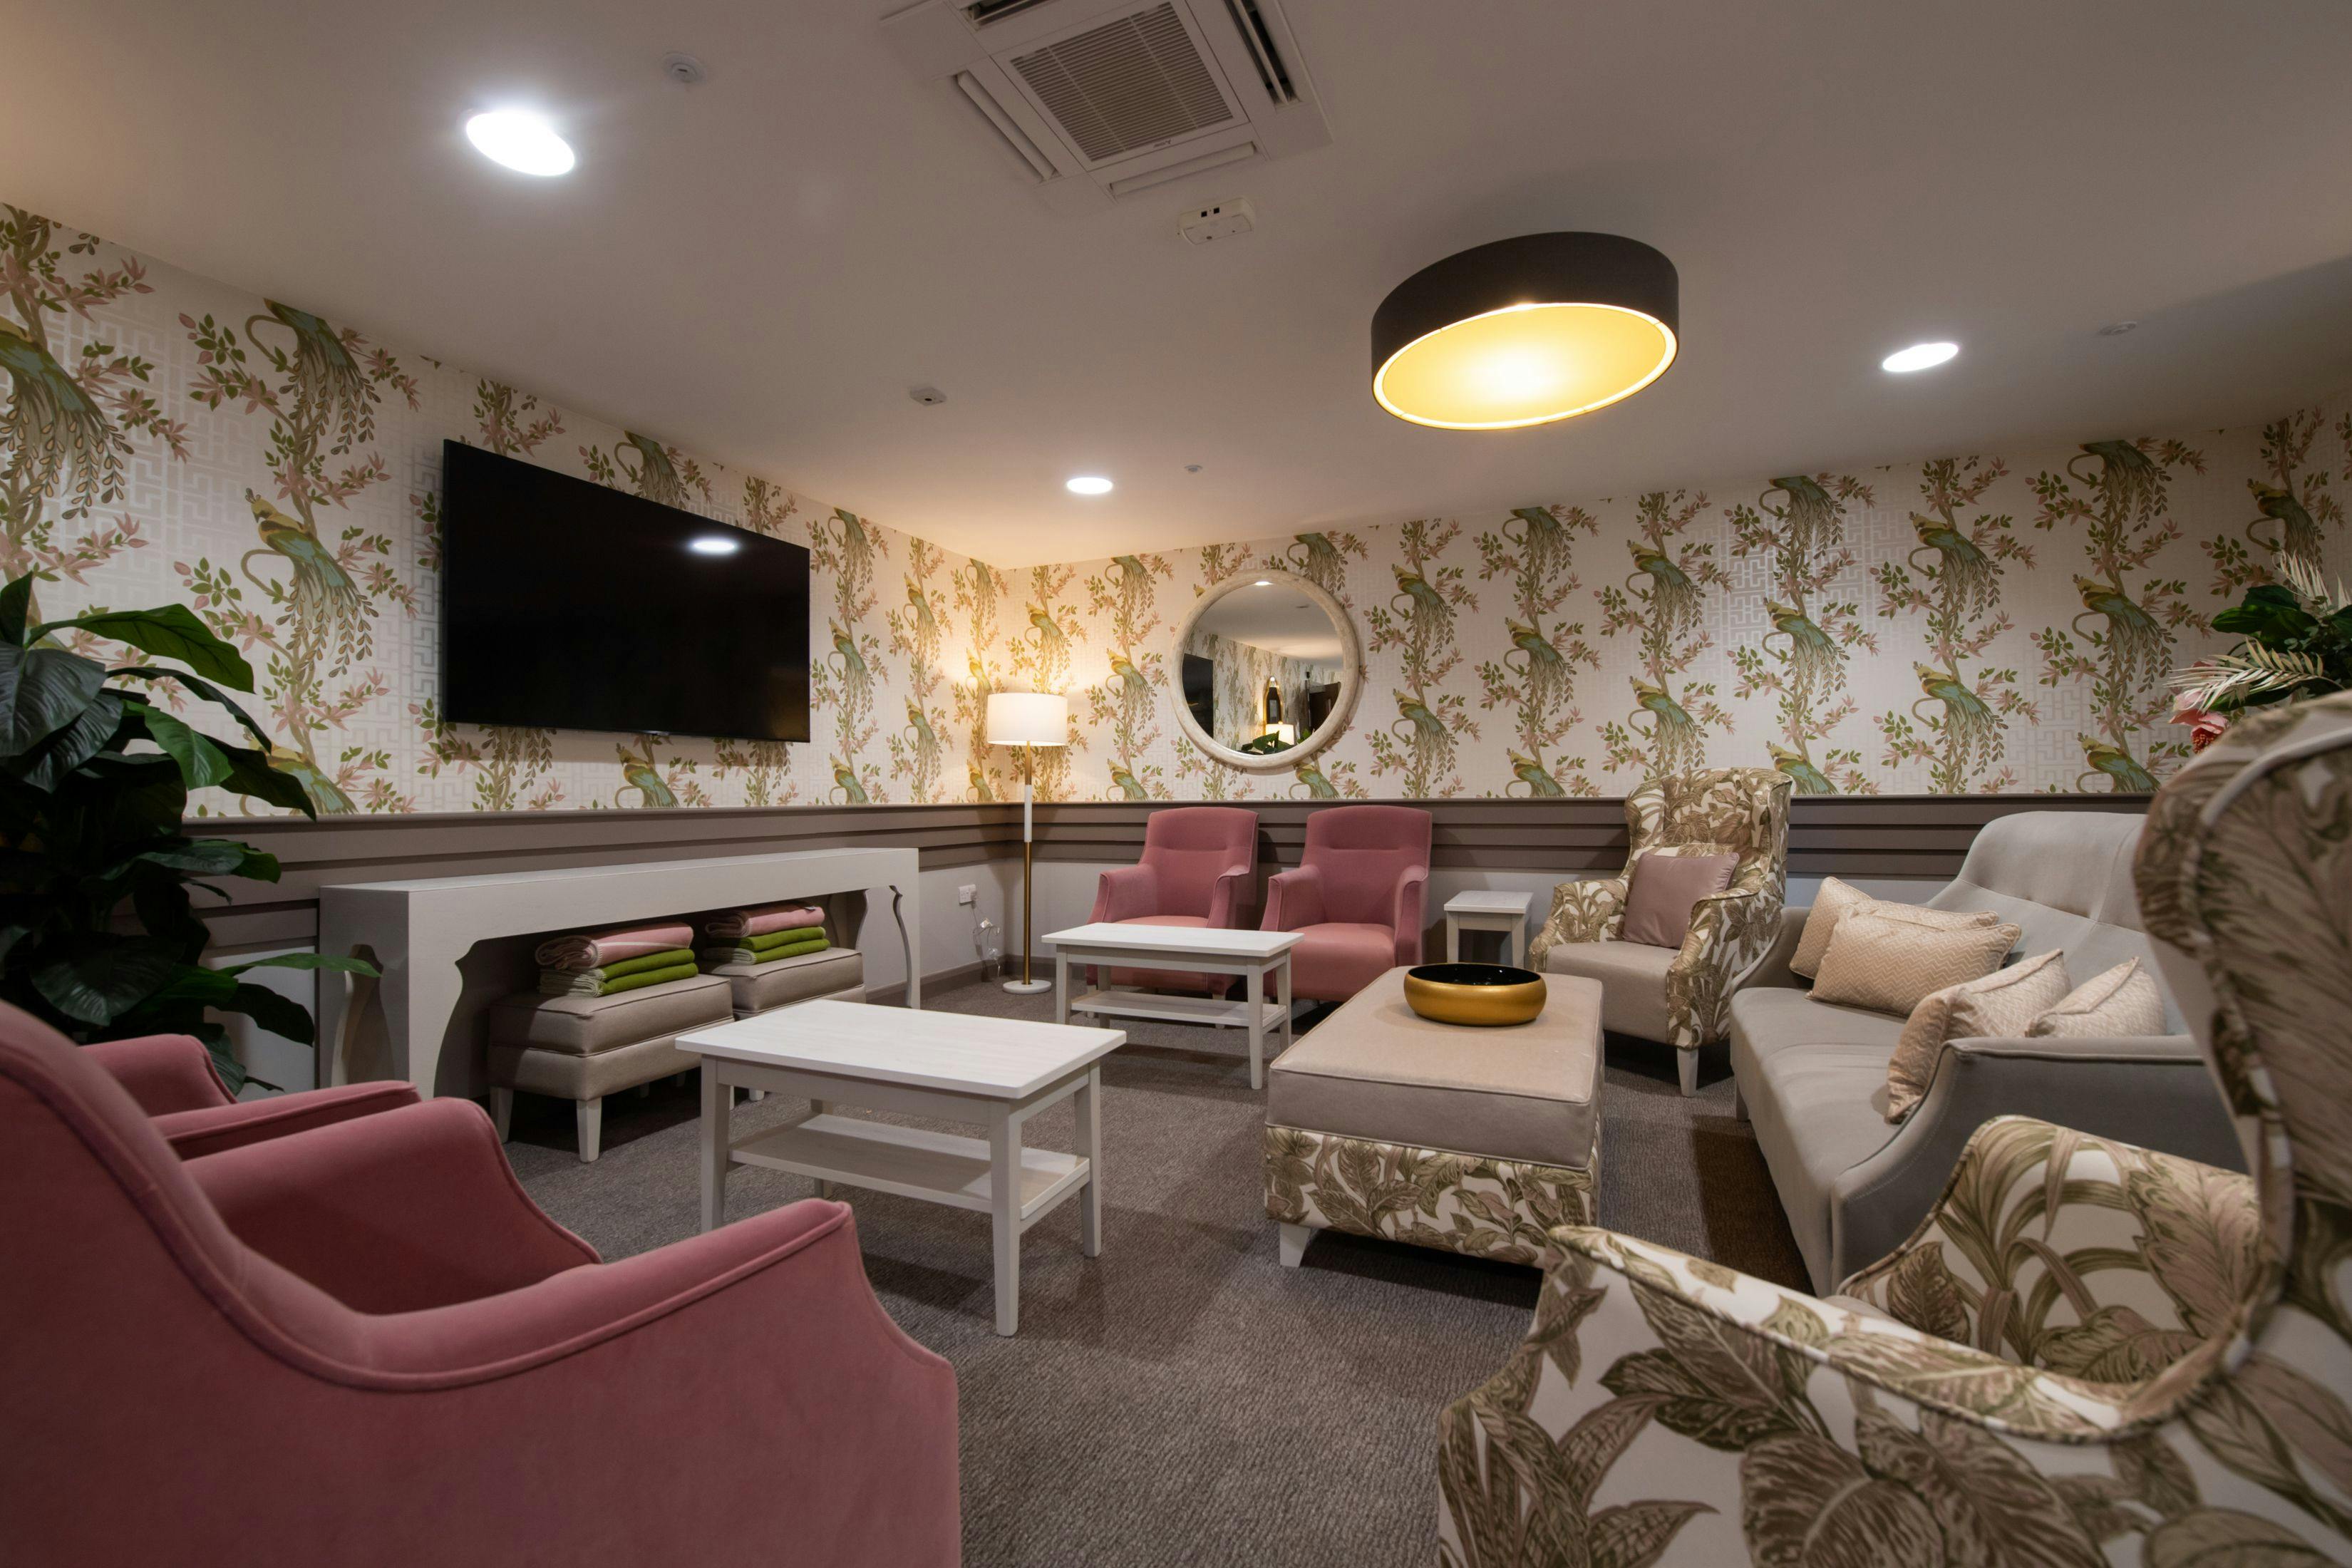 New Care - Wilmslow Manor care home 1